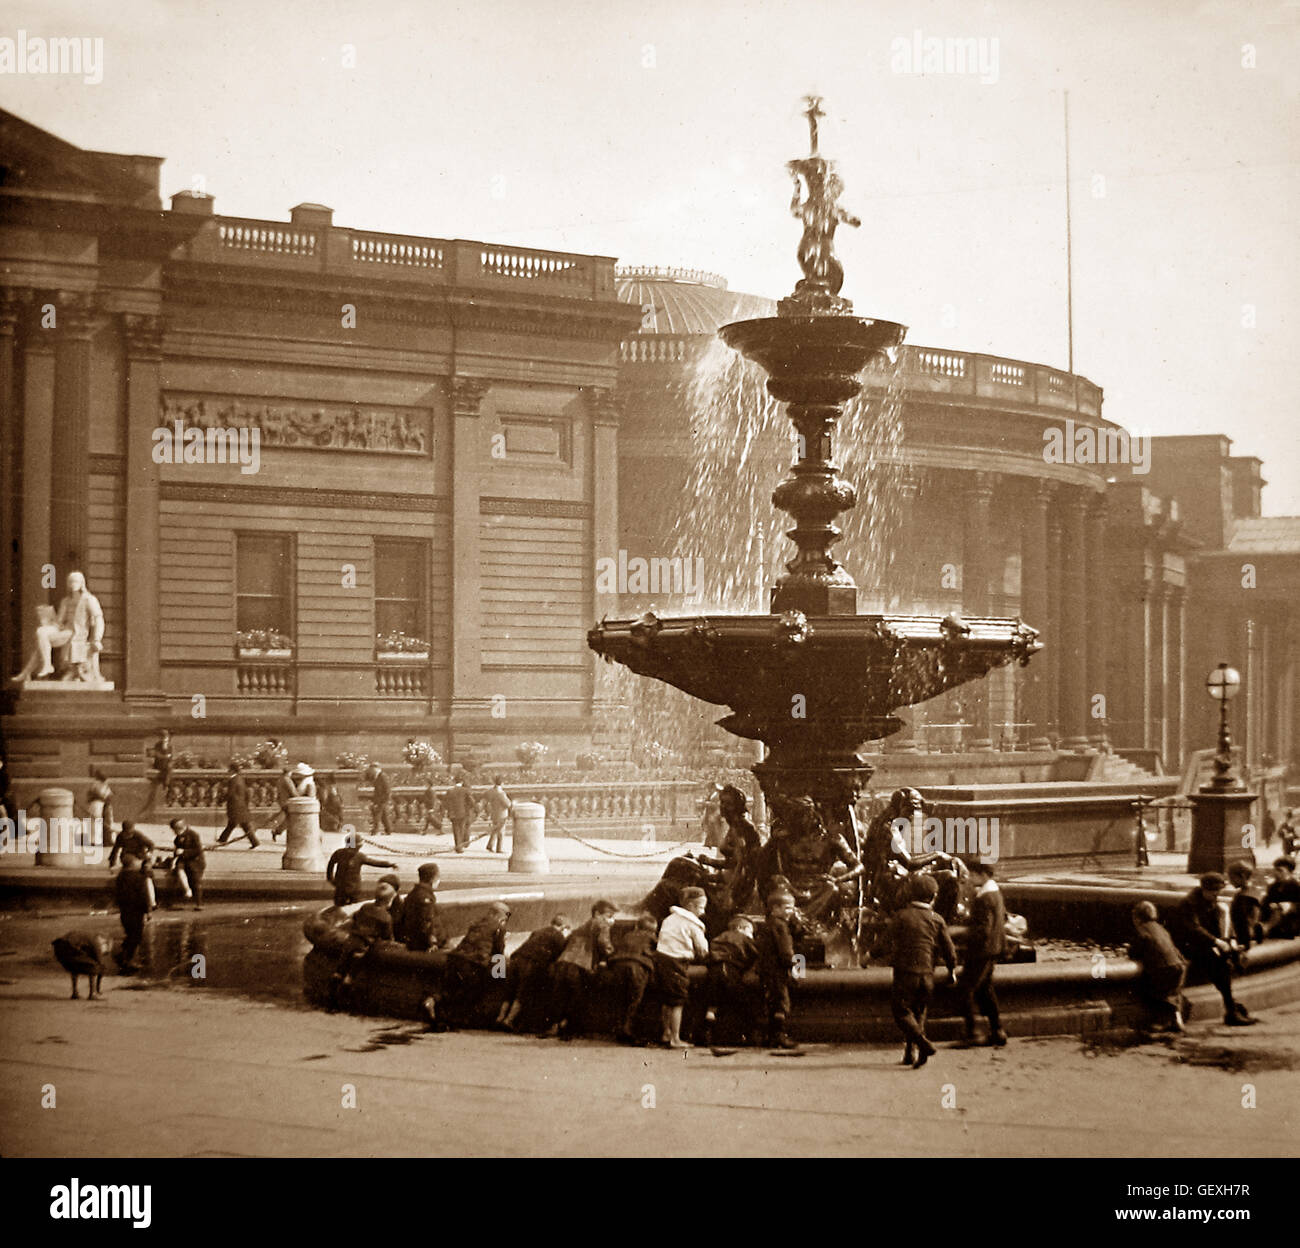 Lime Street, Liverpool - Victorian period Stock Photo